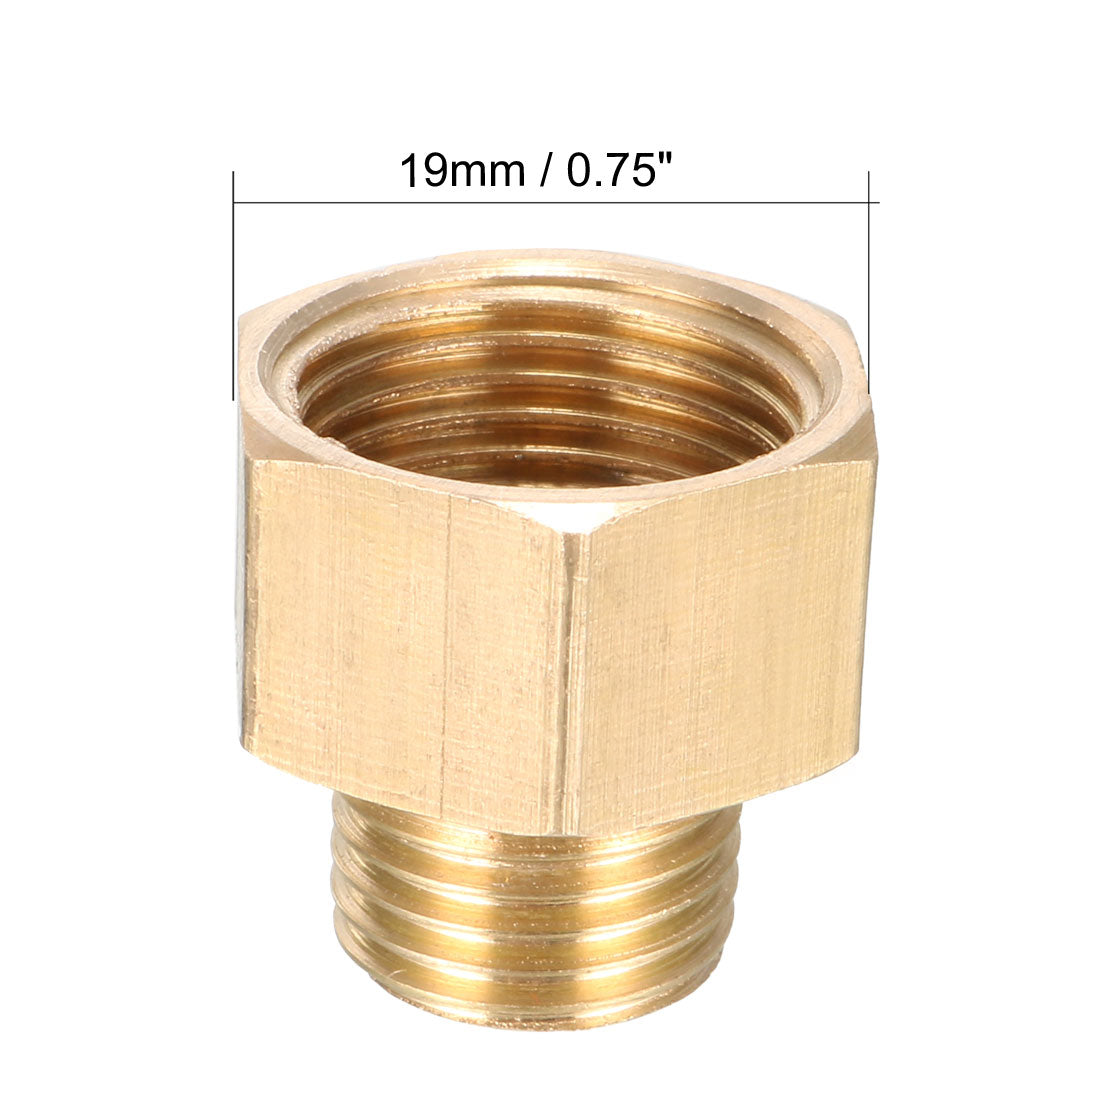 uxcell Uxcell Brass Threaded Pipe Fitting G1/4 Male x G3/8 Female Coupling 3pcs